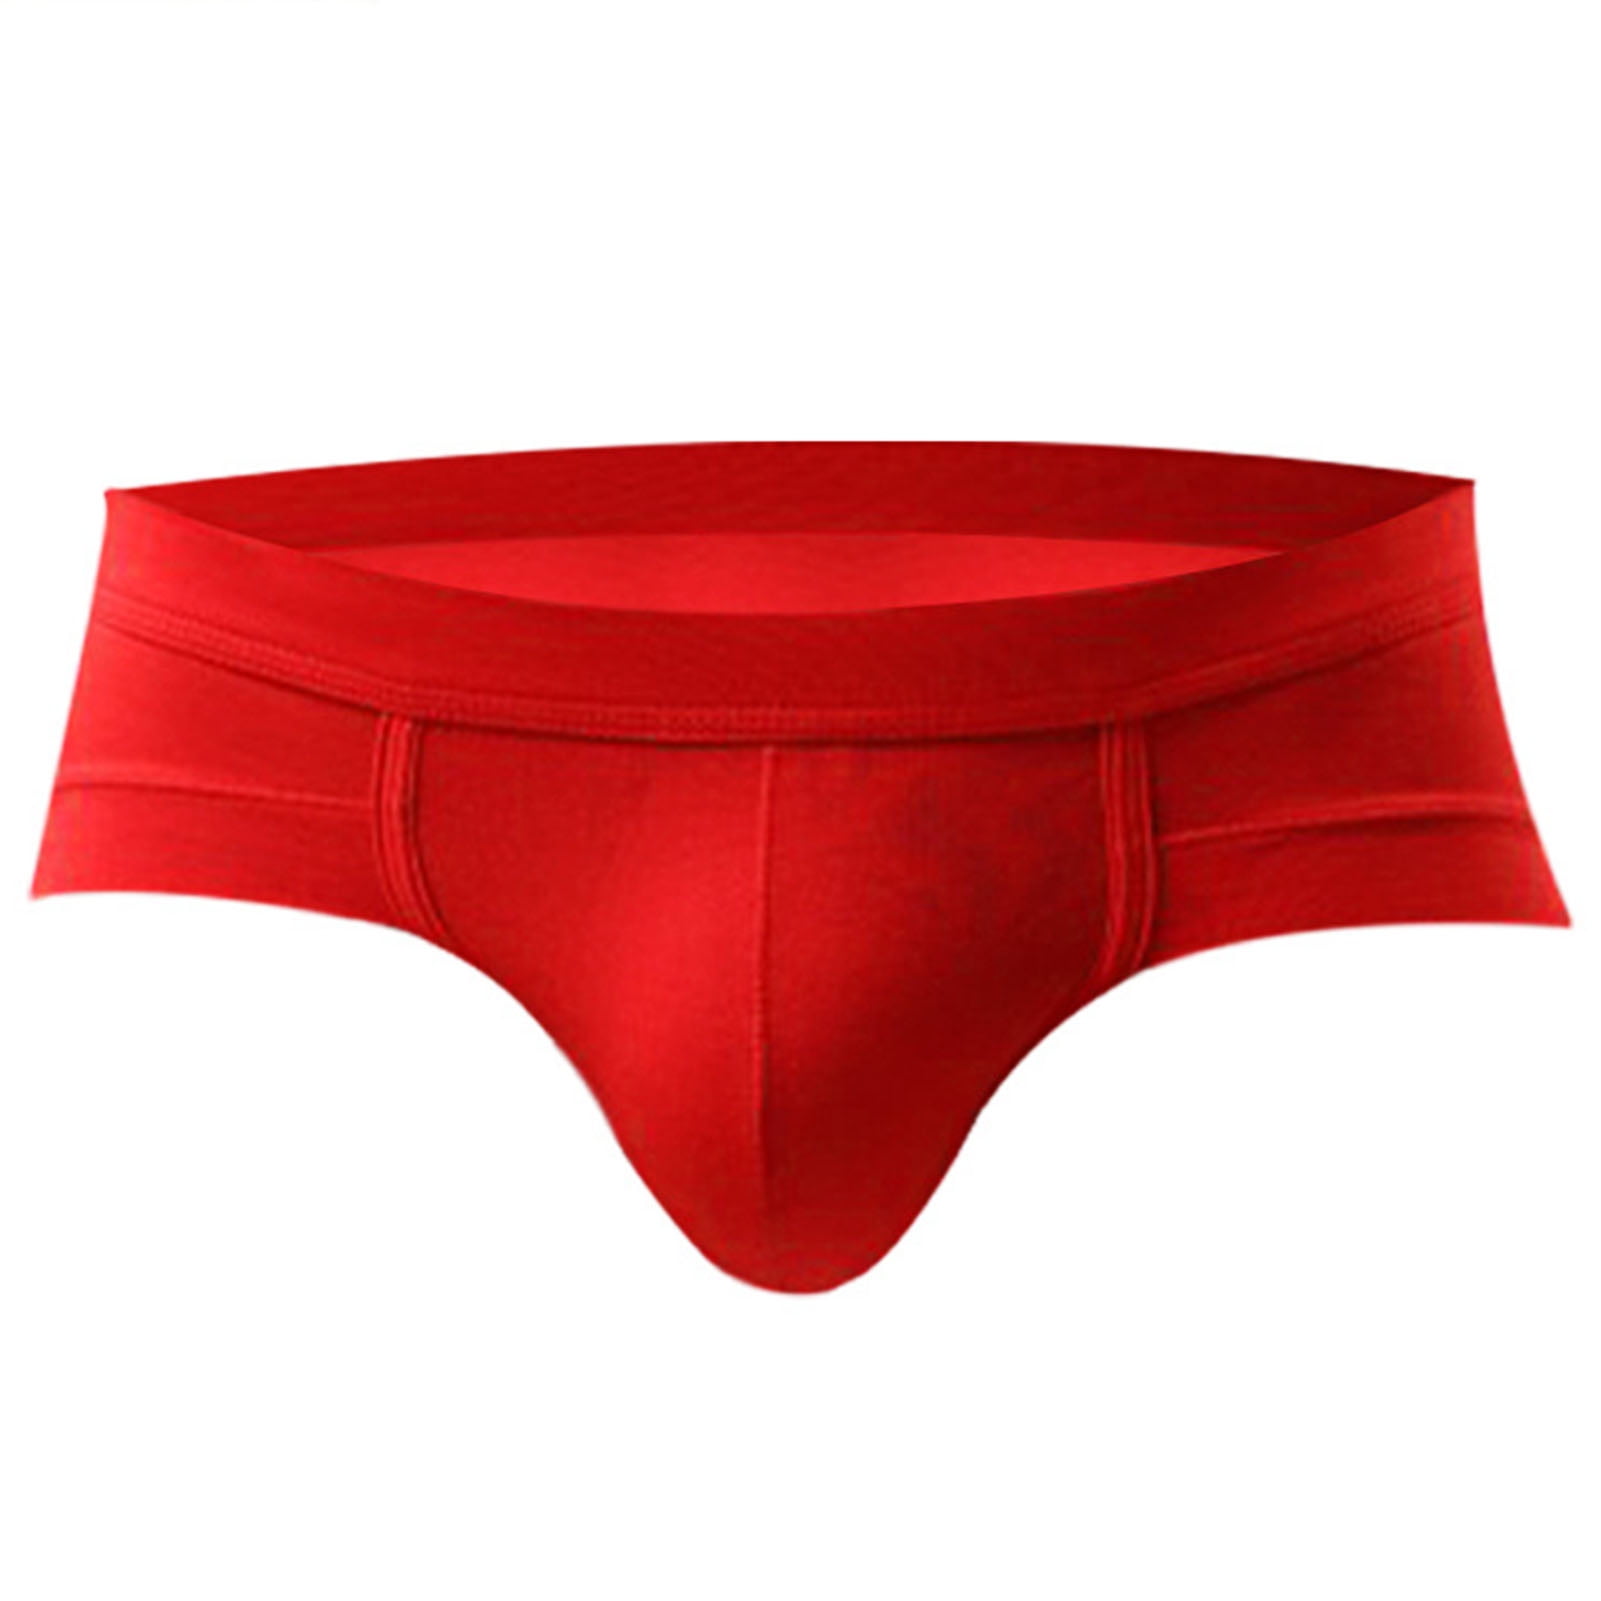 Sunnymall Soutong Underpants Light Breathable Low Rise Sexy U-Convex ...